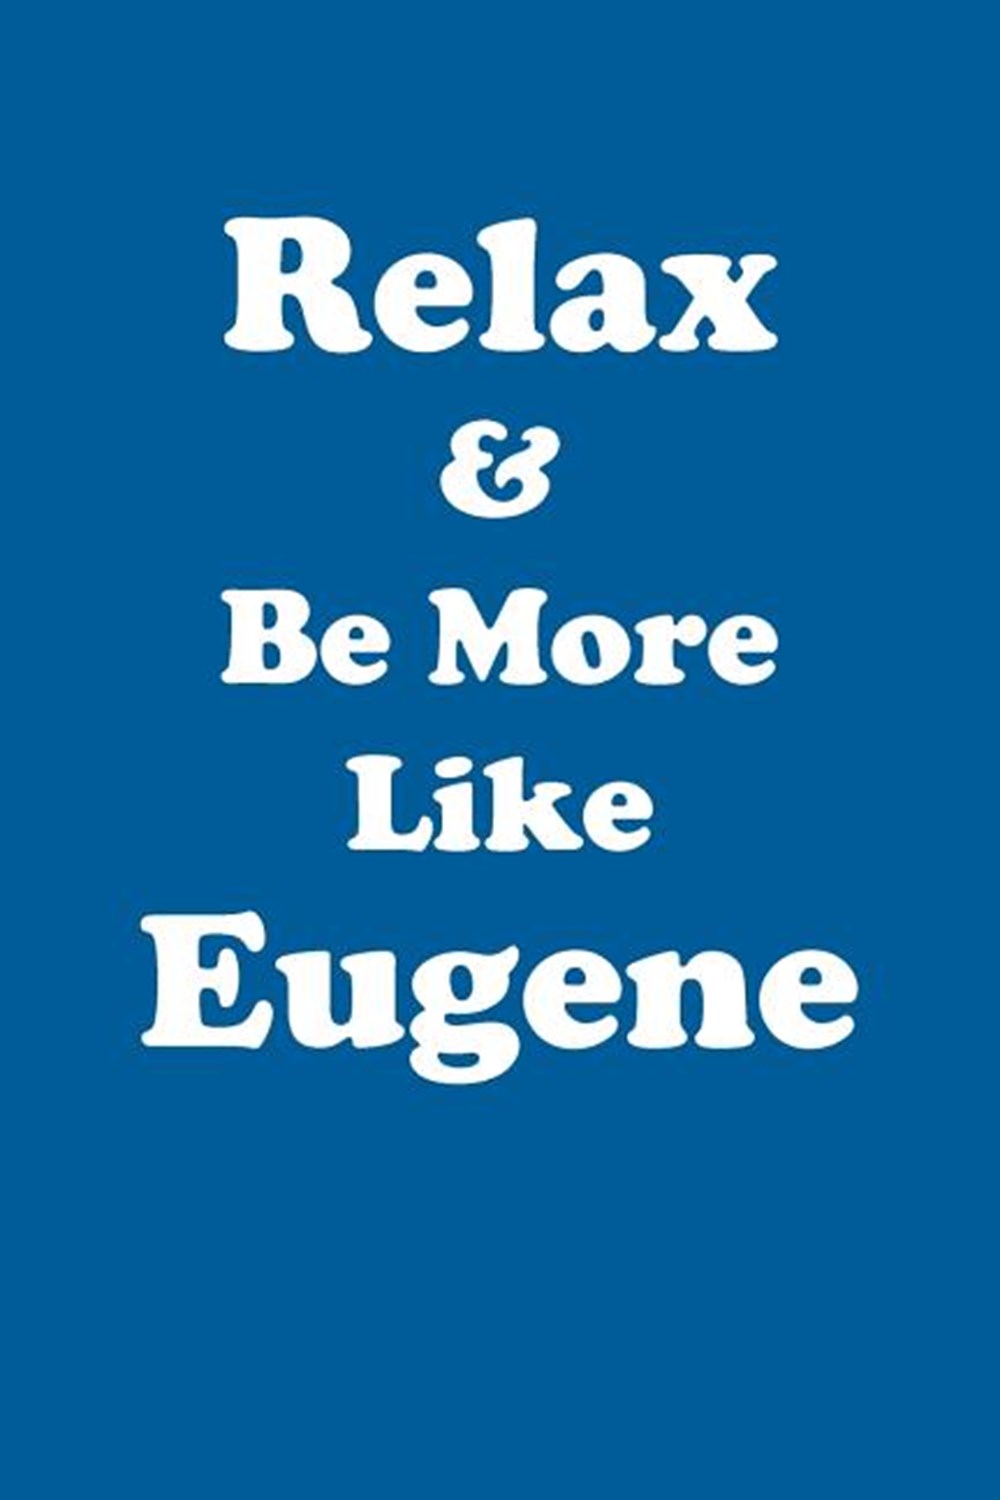 Relax & Be More Like Eugene Affirmations Workbook Positive Affirmations Workbook Includes Mentoring 